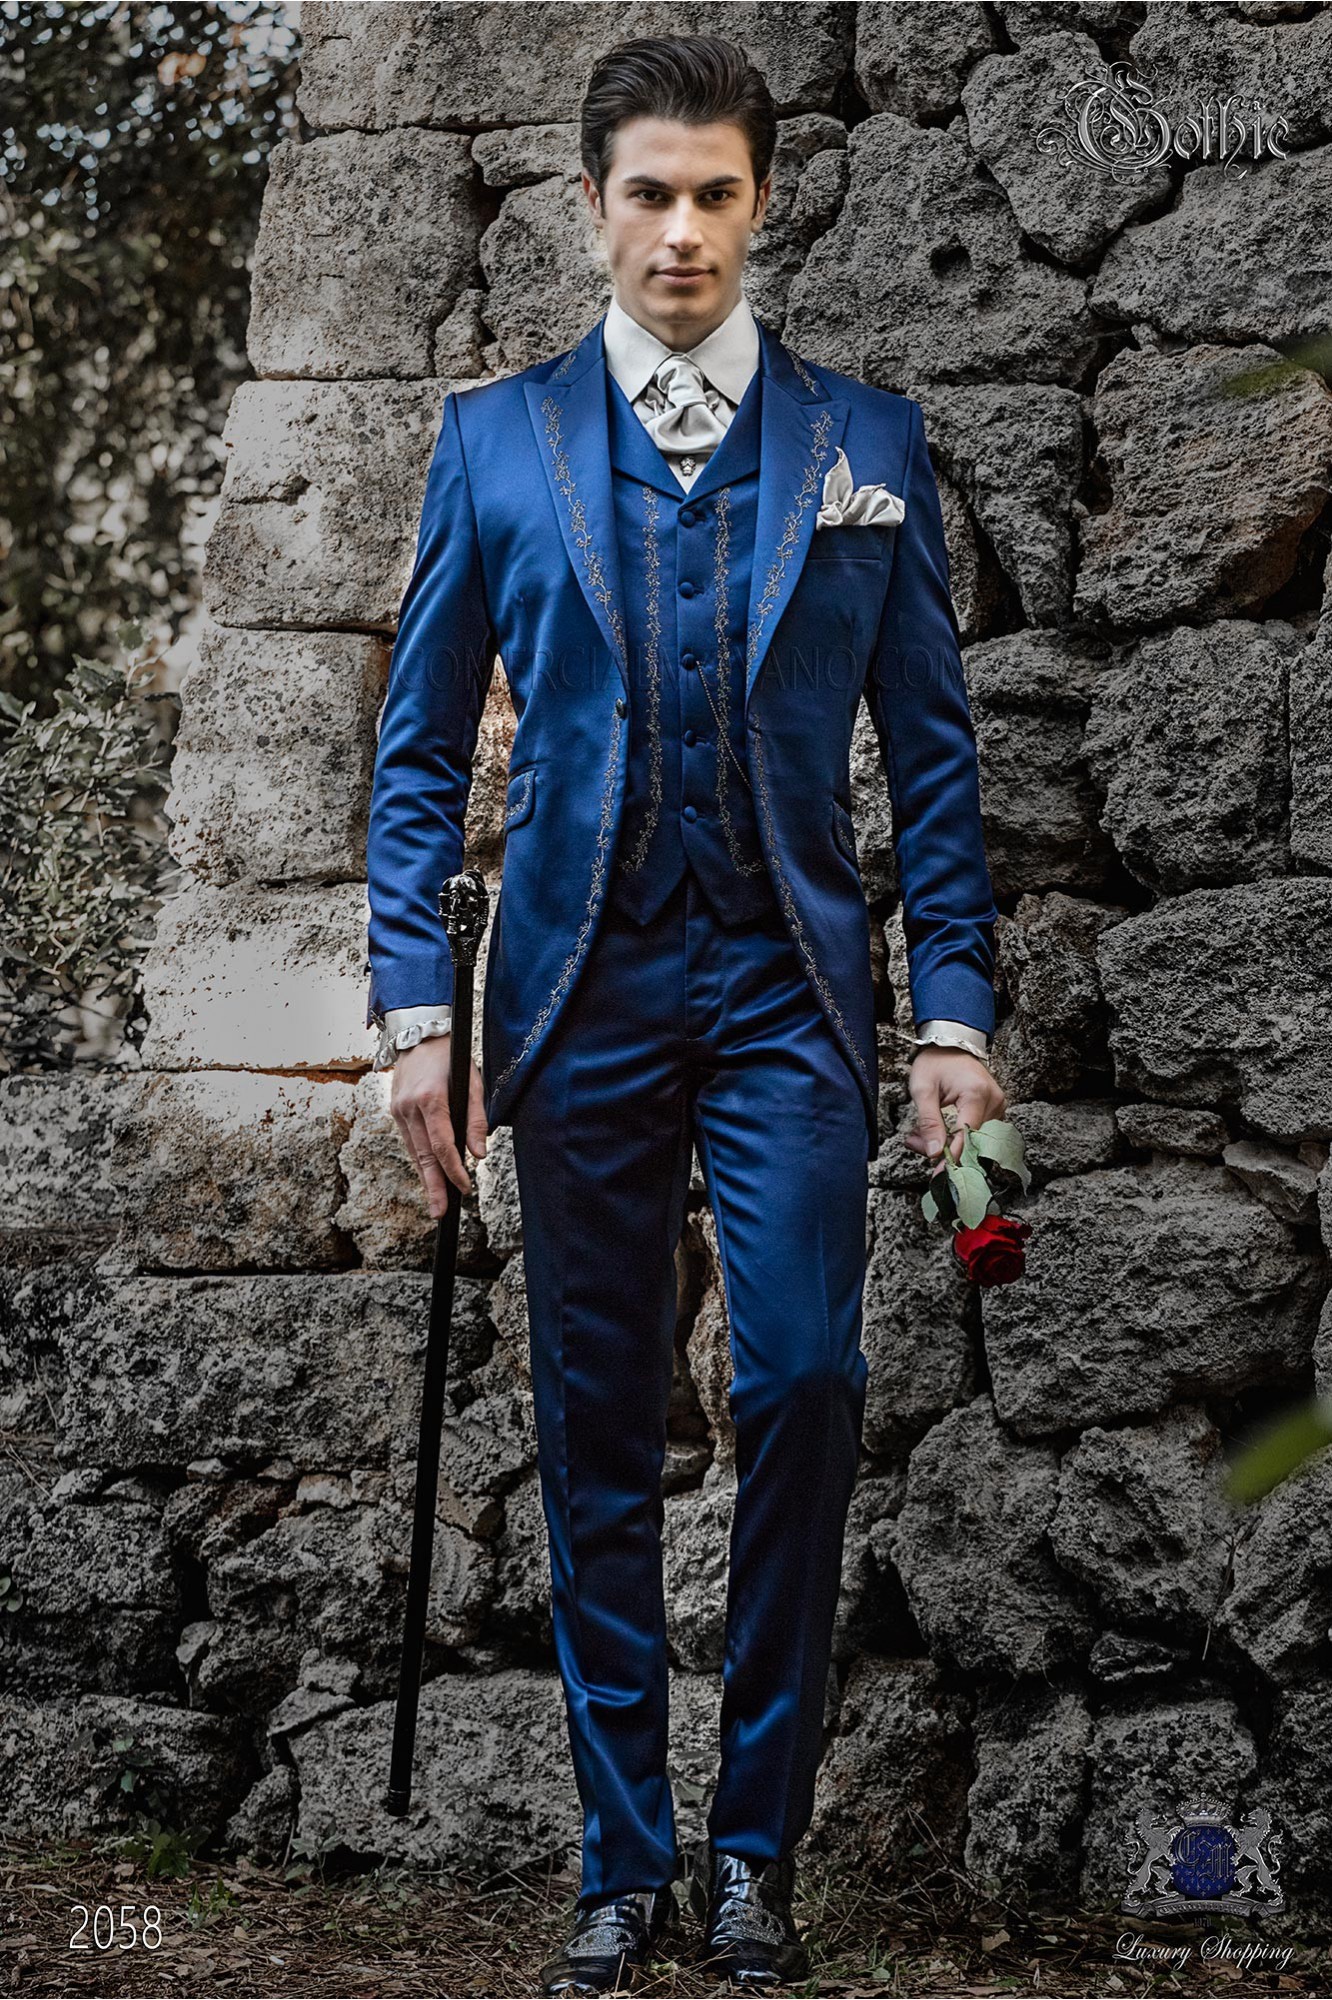 Baroque groom suit, vintage frock coat in blue satin fabric with silver embroidery and crystal clasp